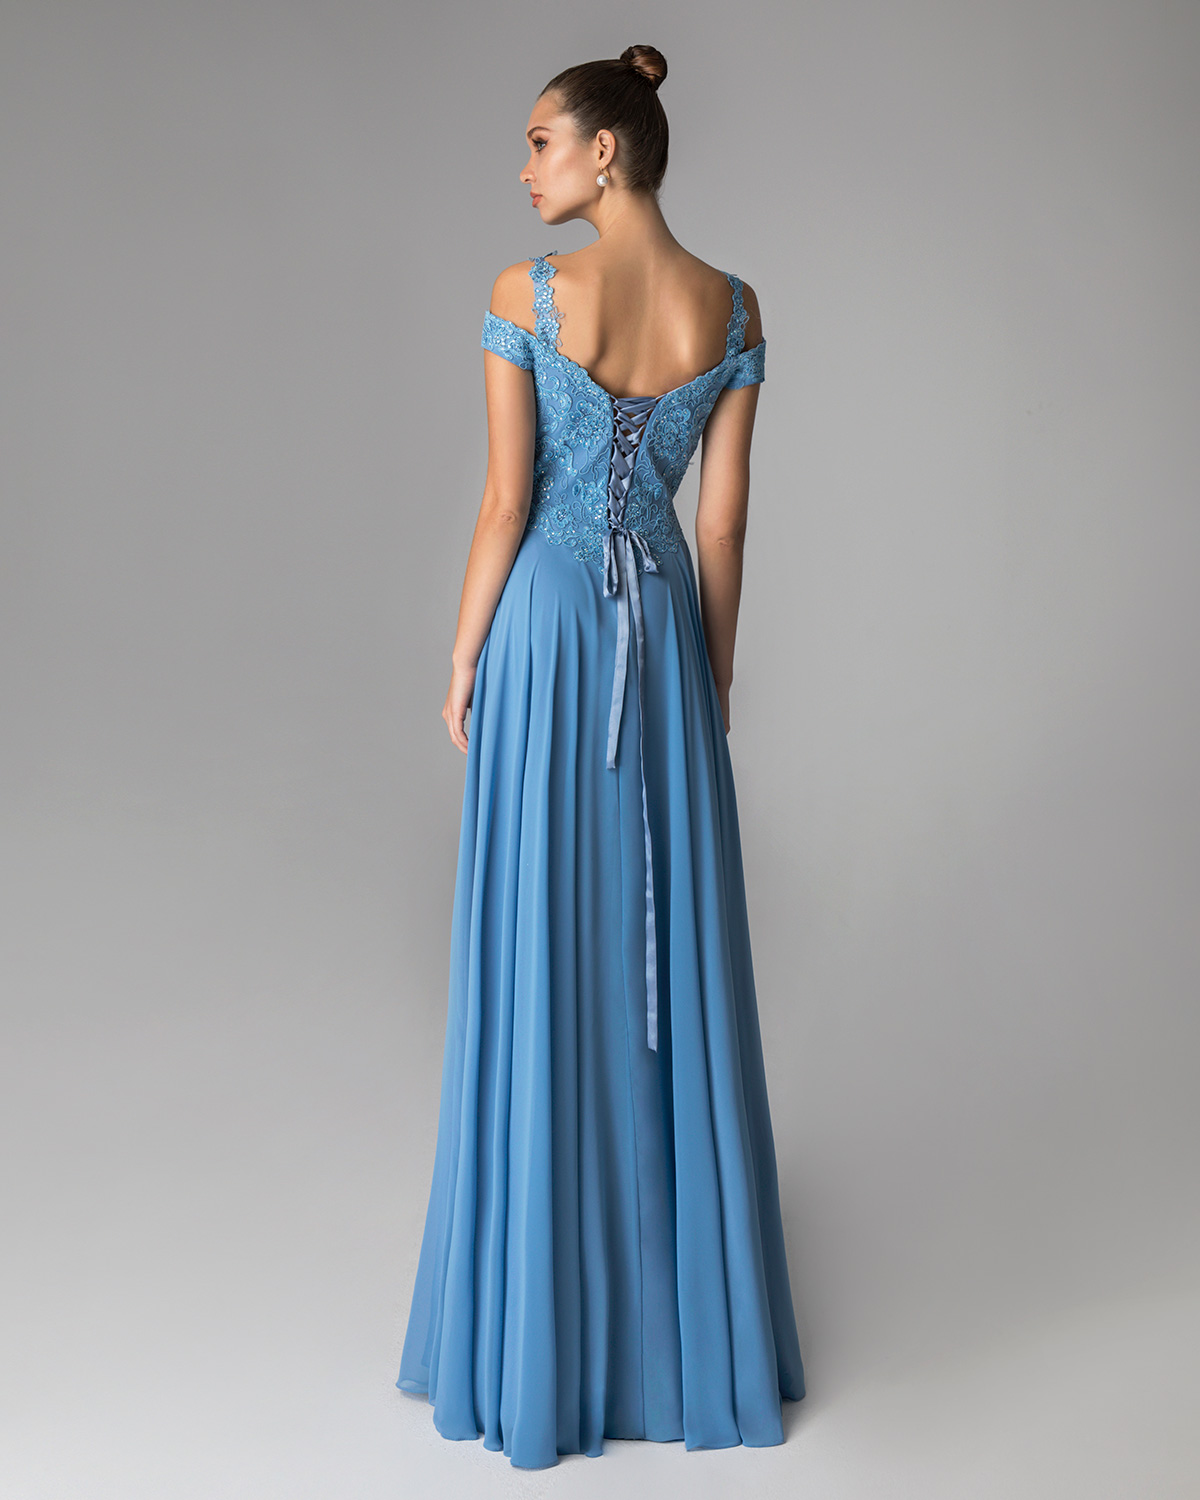 Classic Dresses / Long evening dress with applique lace and beaded top